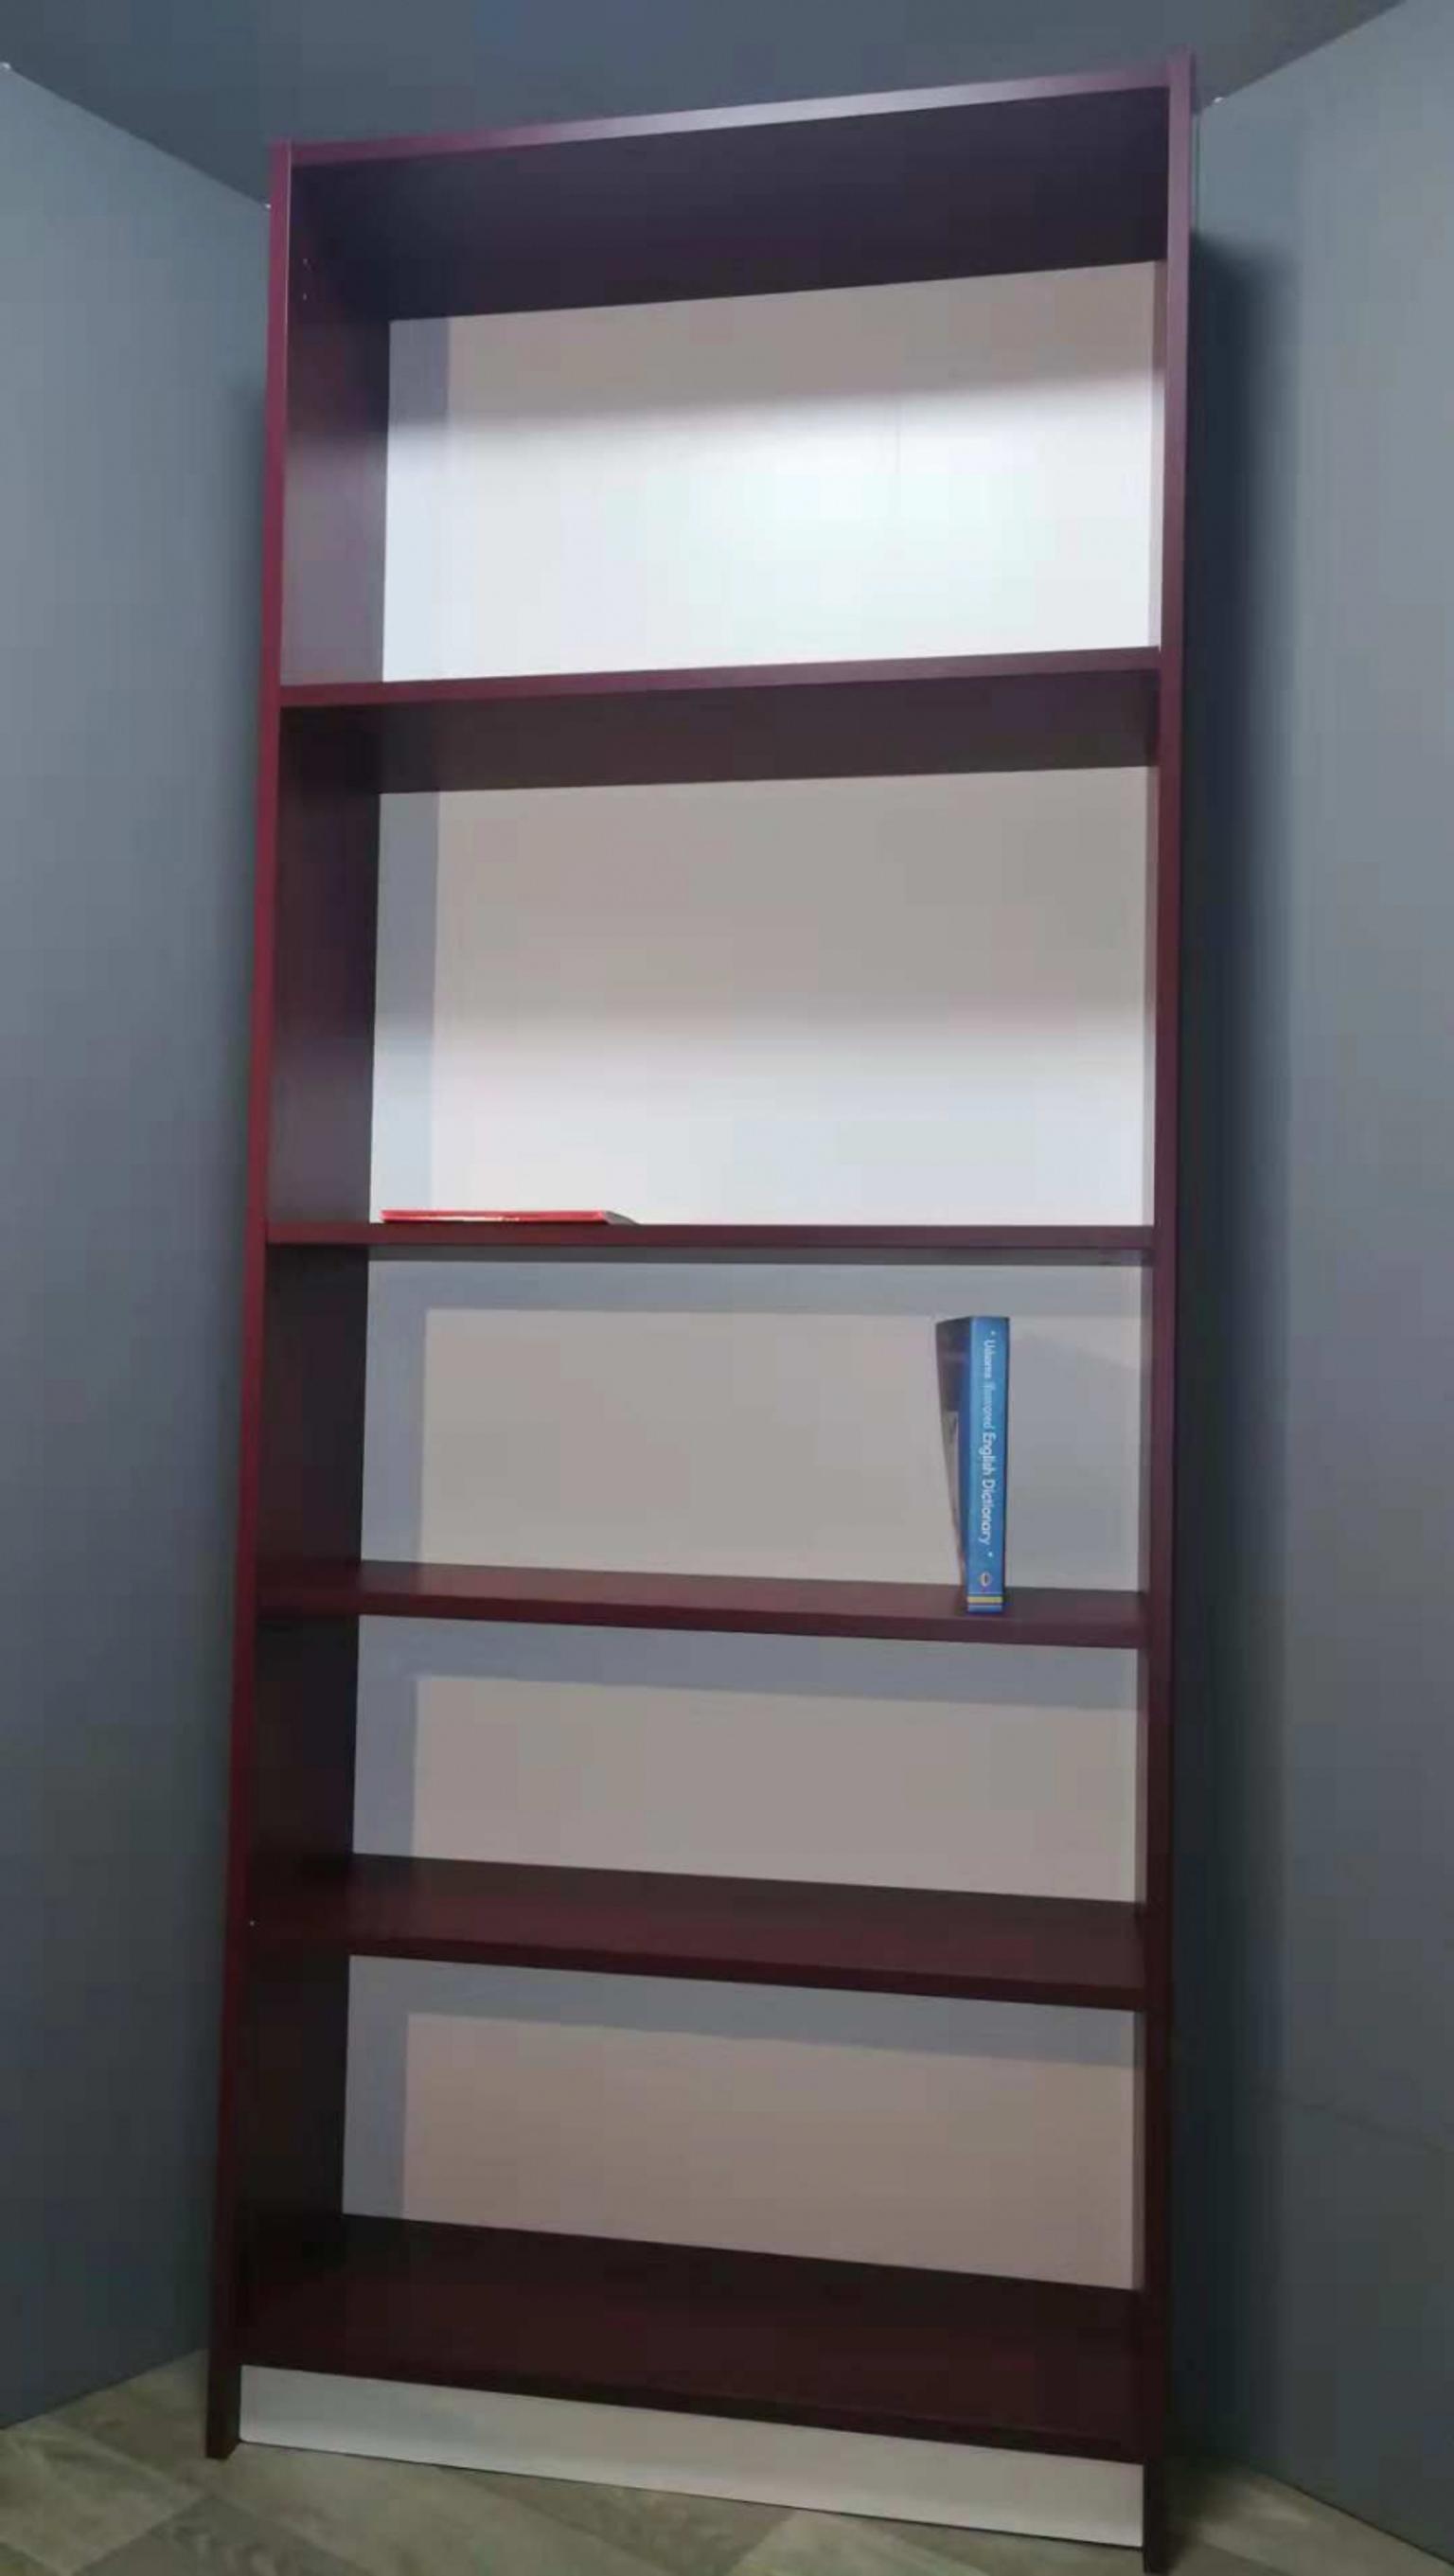 Ikea Billy Bookcase Dark Red In Bd4 Bradford For 35 00 For Sale